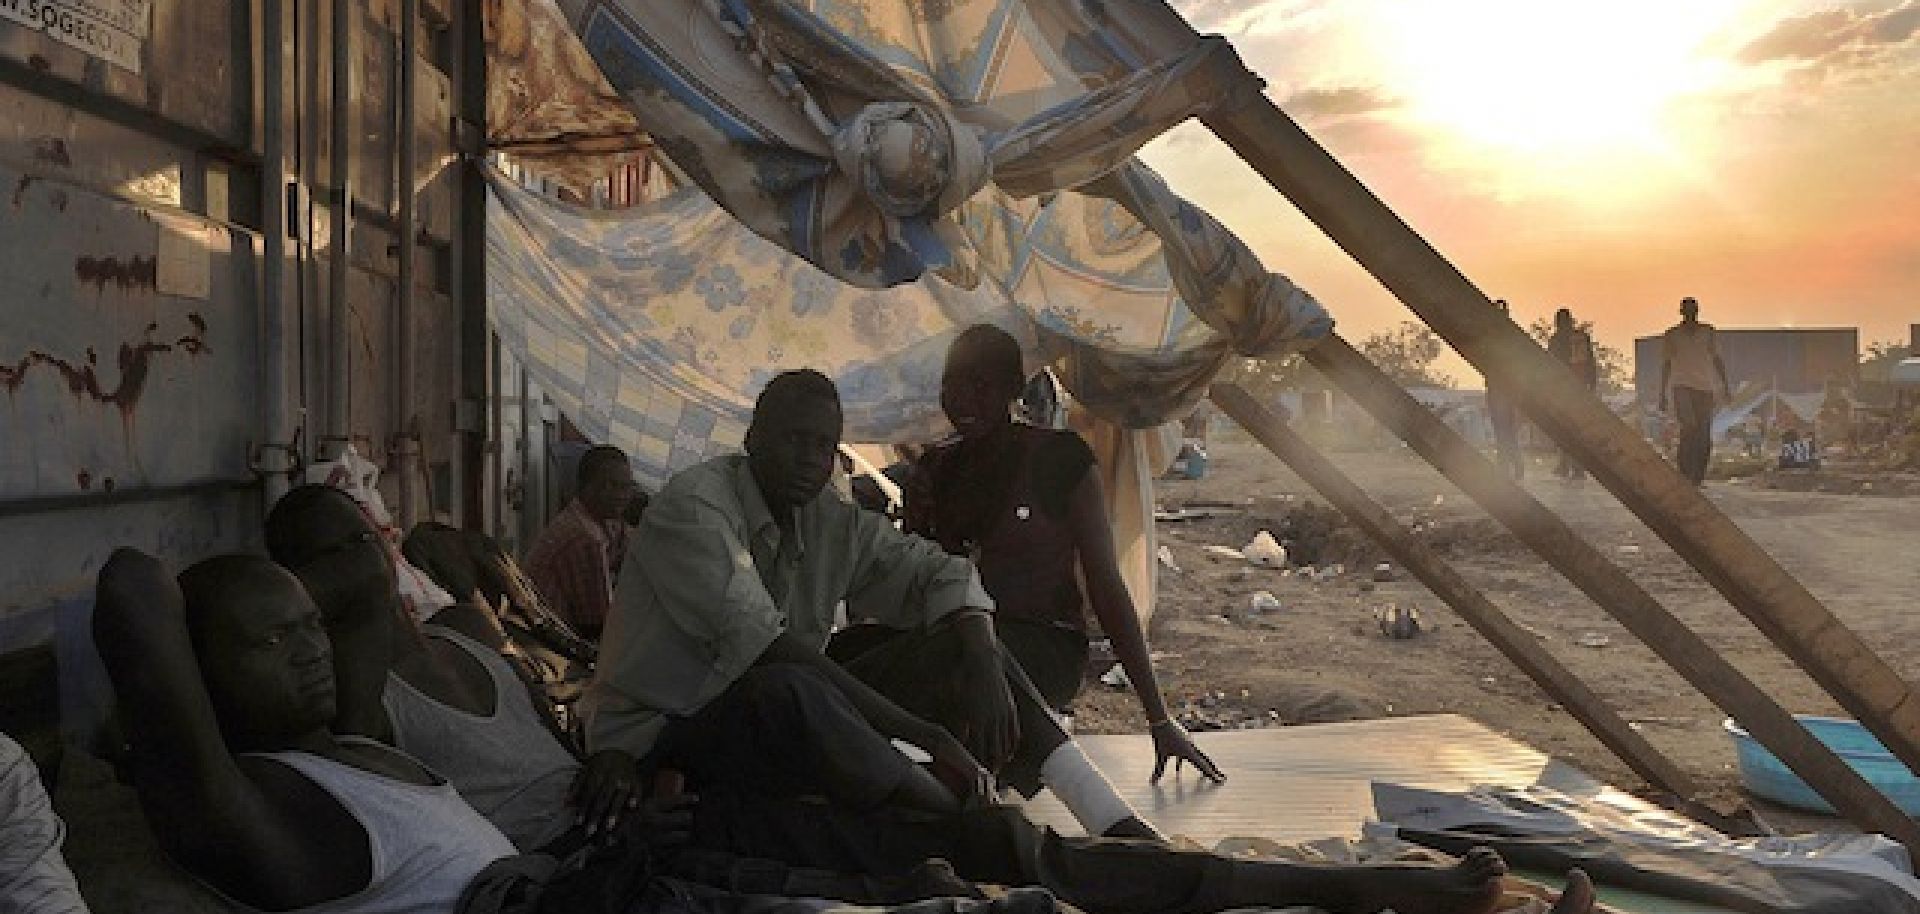 South Sudan: Pressure Mounts for a Negotiated Agreement